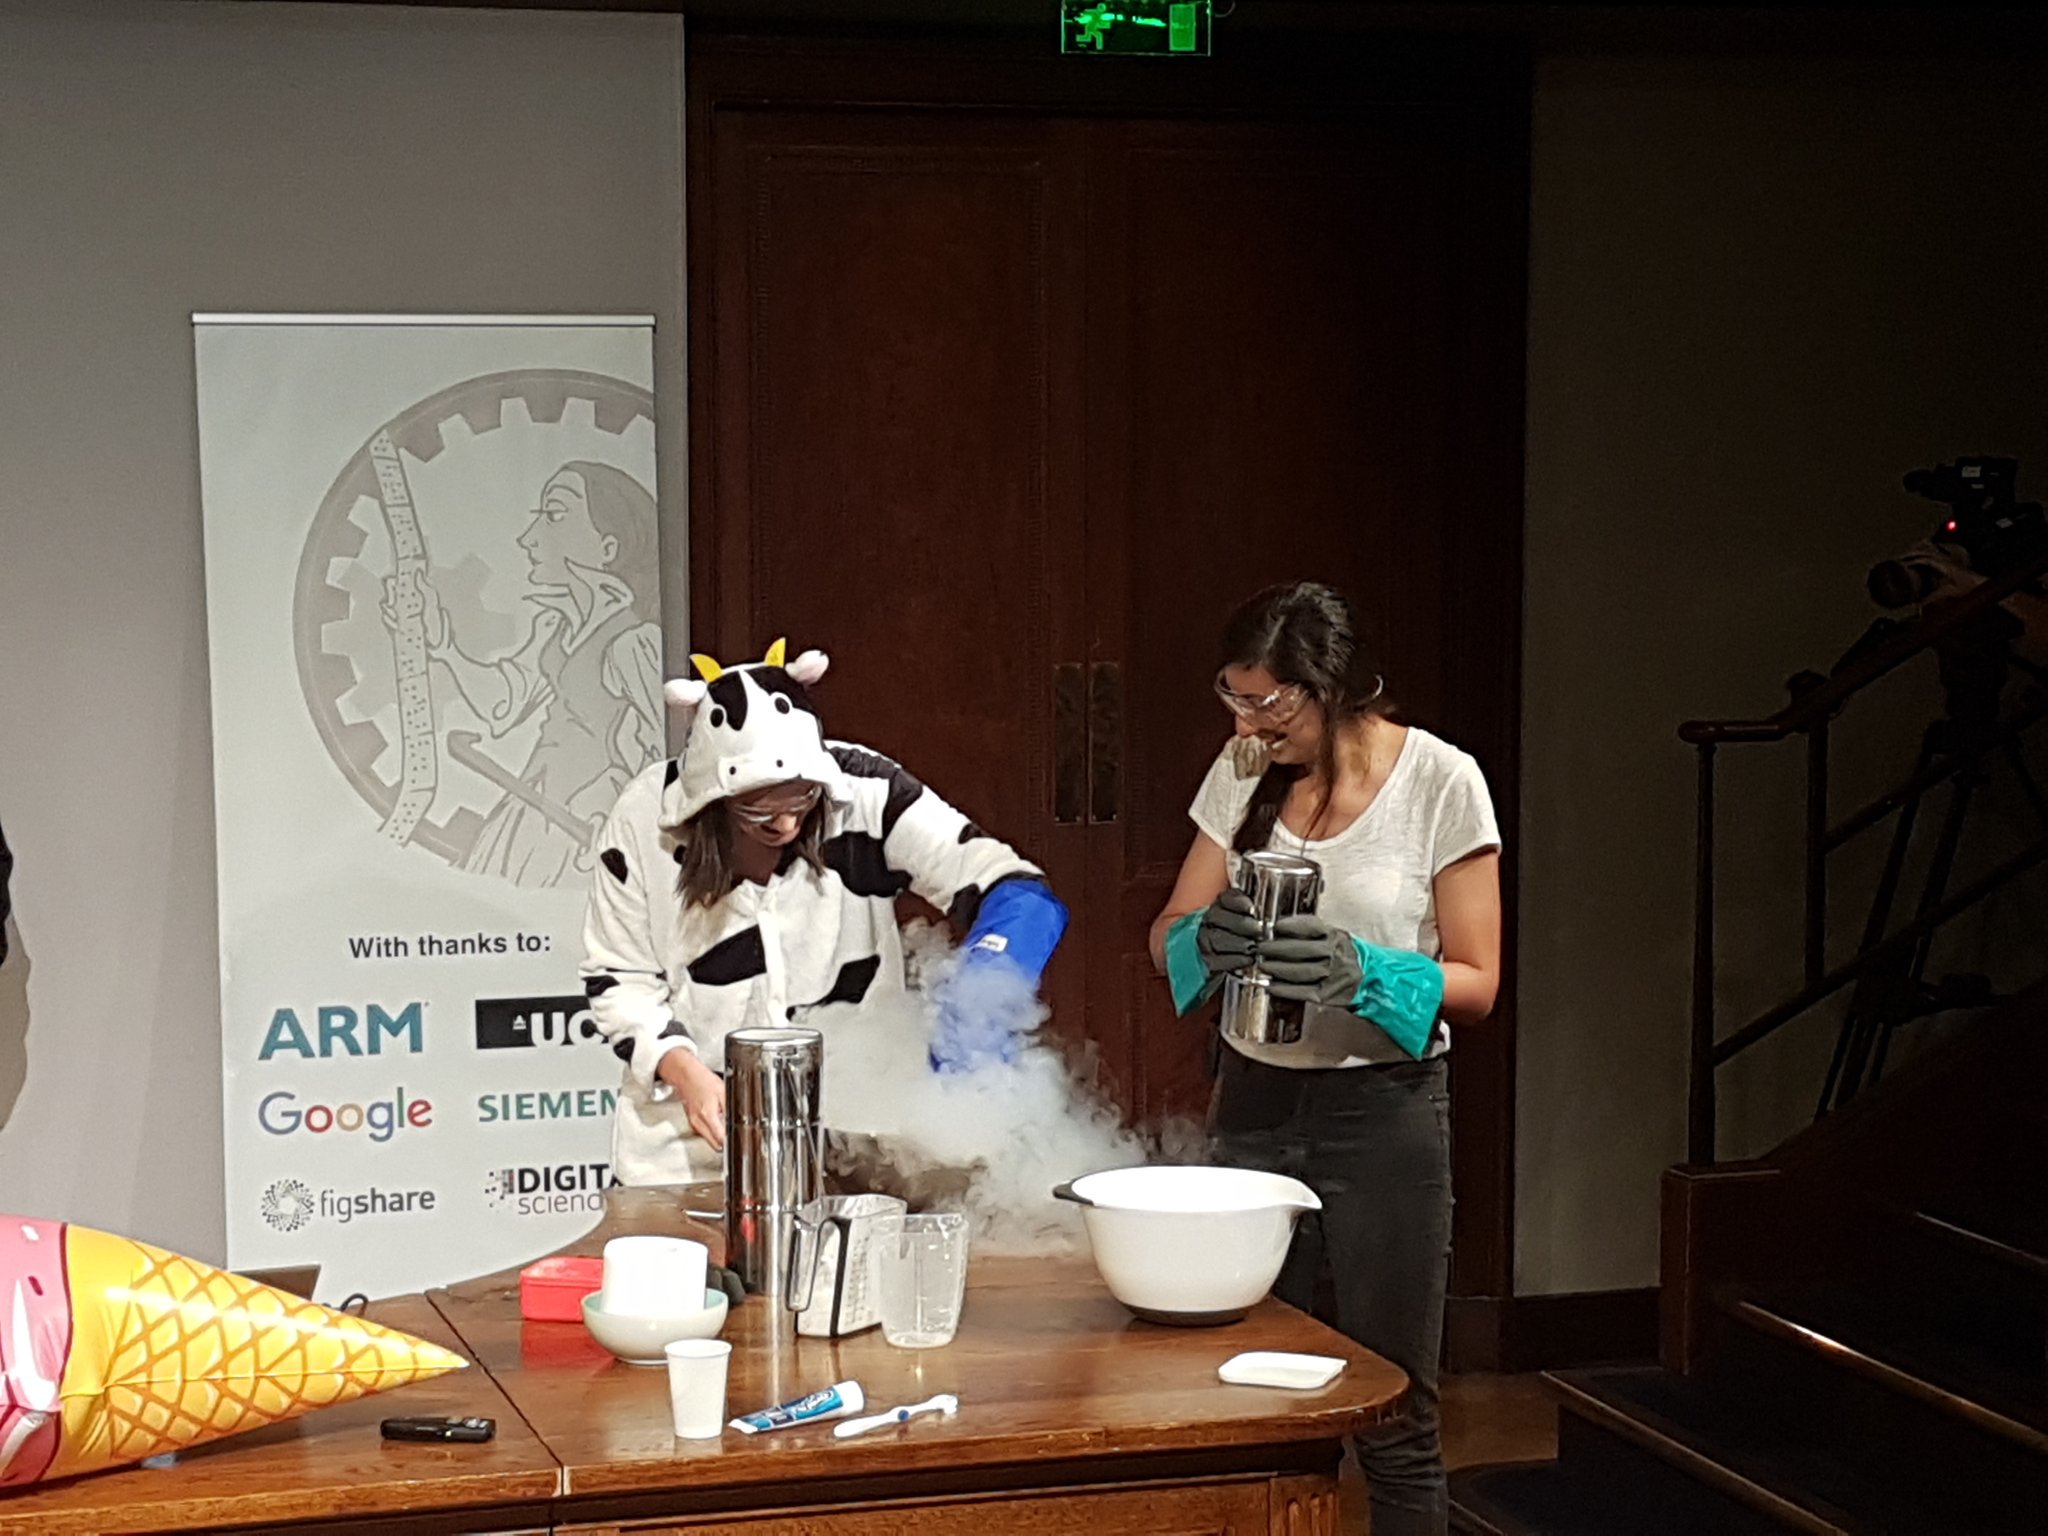 Making ice cream with liquid nitrogen. Don't try this at home kids... #ALD17 https://t.co/Xpq0OOGzxP